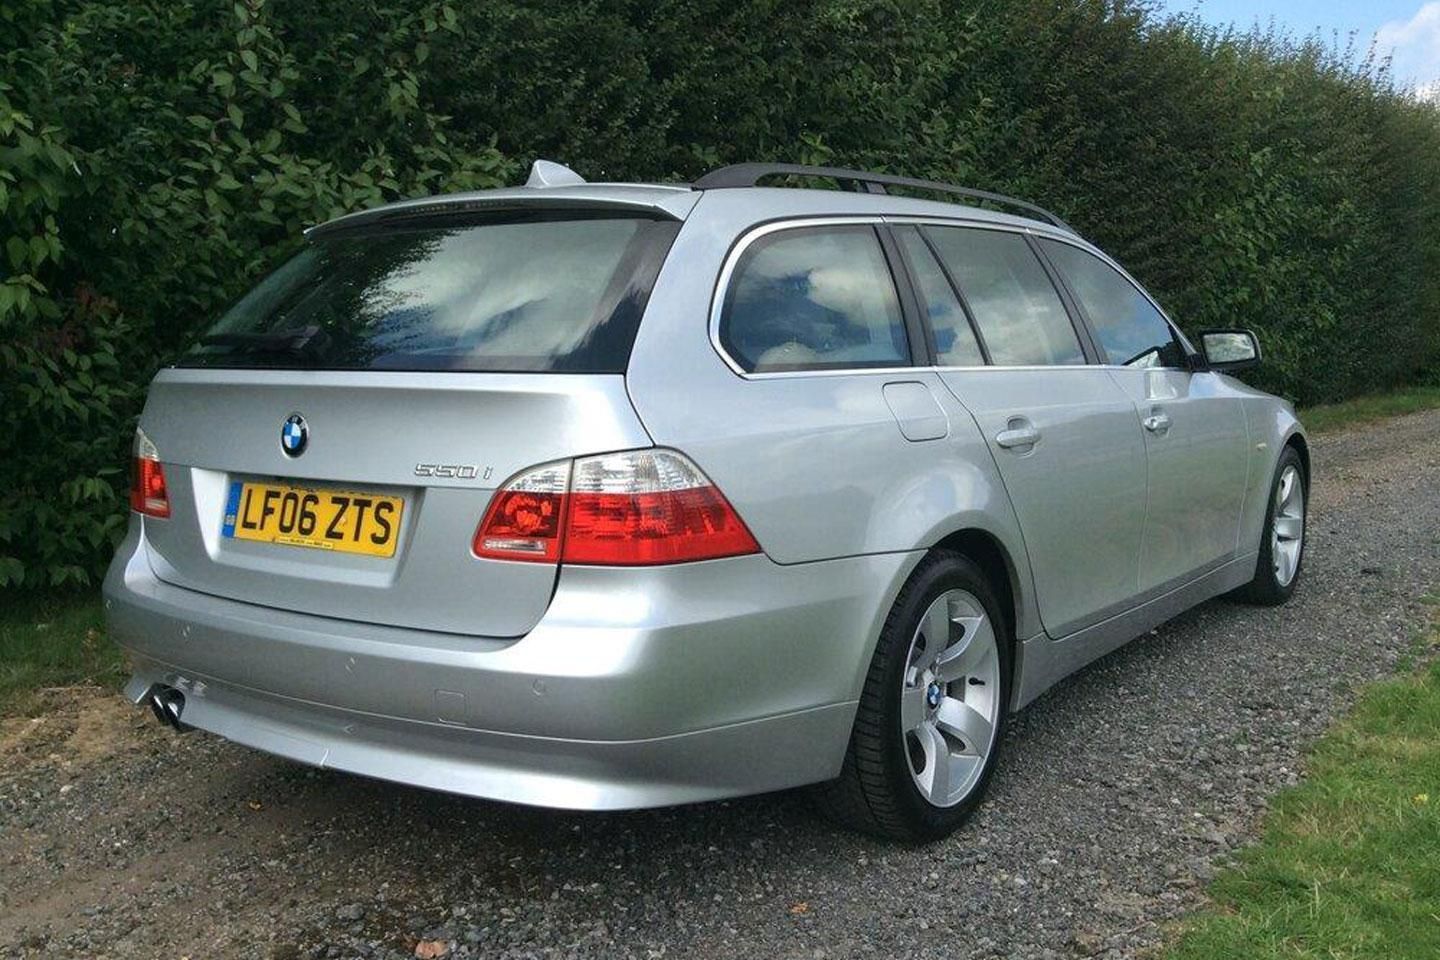 Review : BMW 5 Series E60 ( 2003 - 2010 ) - Almost Cars Reviews